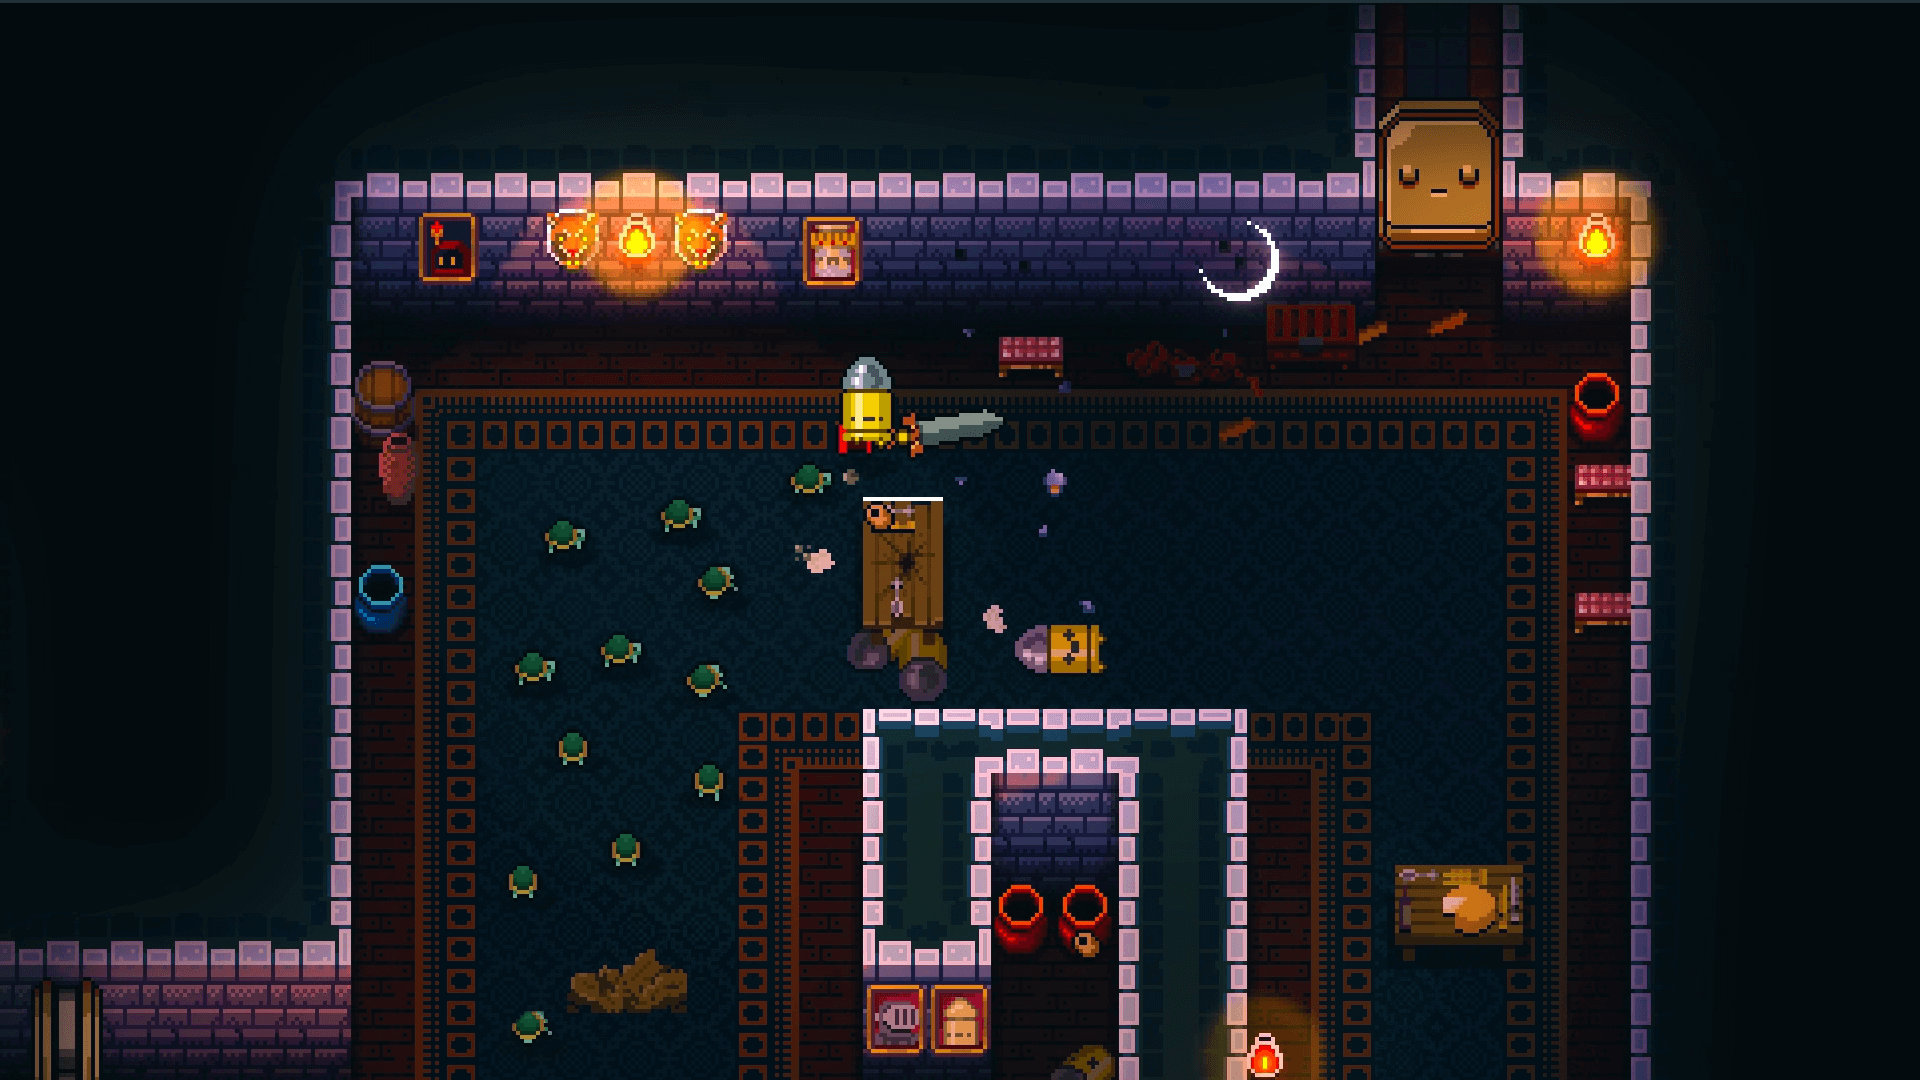 http://www.cosmocover.com/wp-content/uploads/2019/03/Enter-the-Gungeon-FTA-Screen-1.png